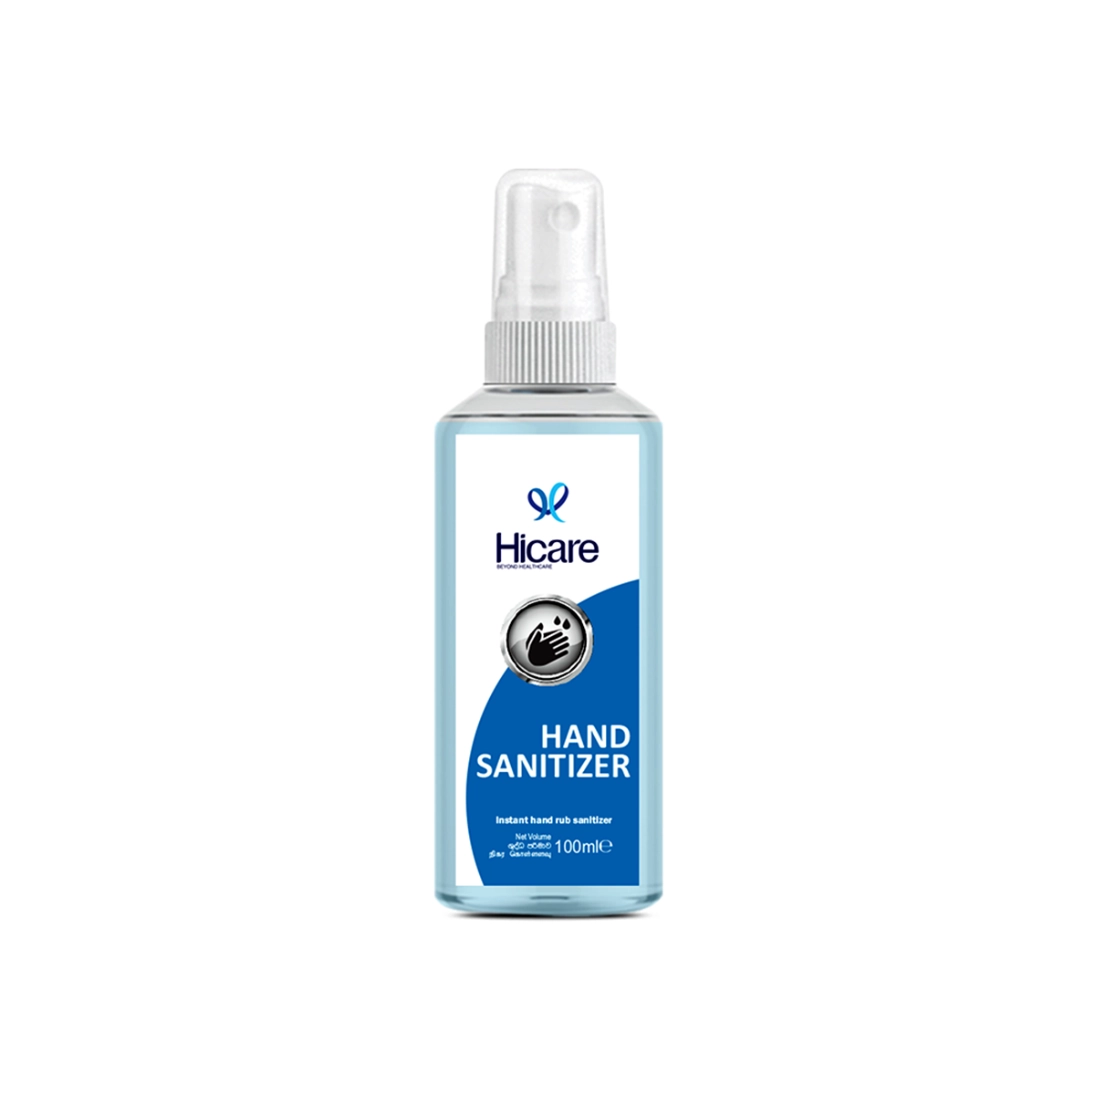 First product image of Hicare Hand Sanitizer Liquid Spary 100ml